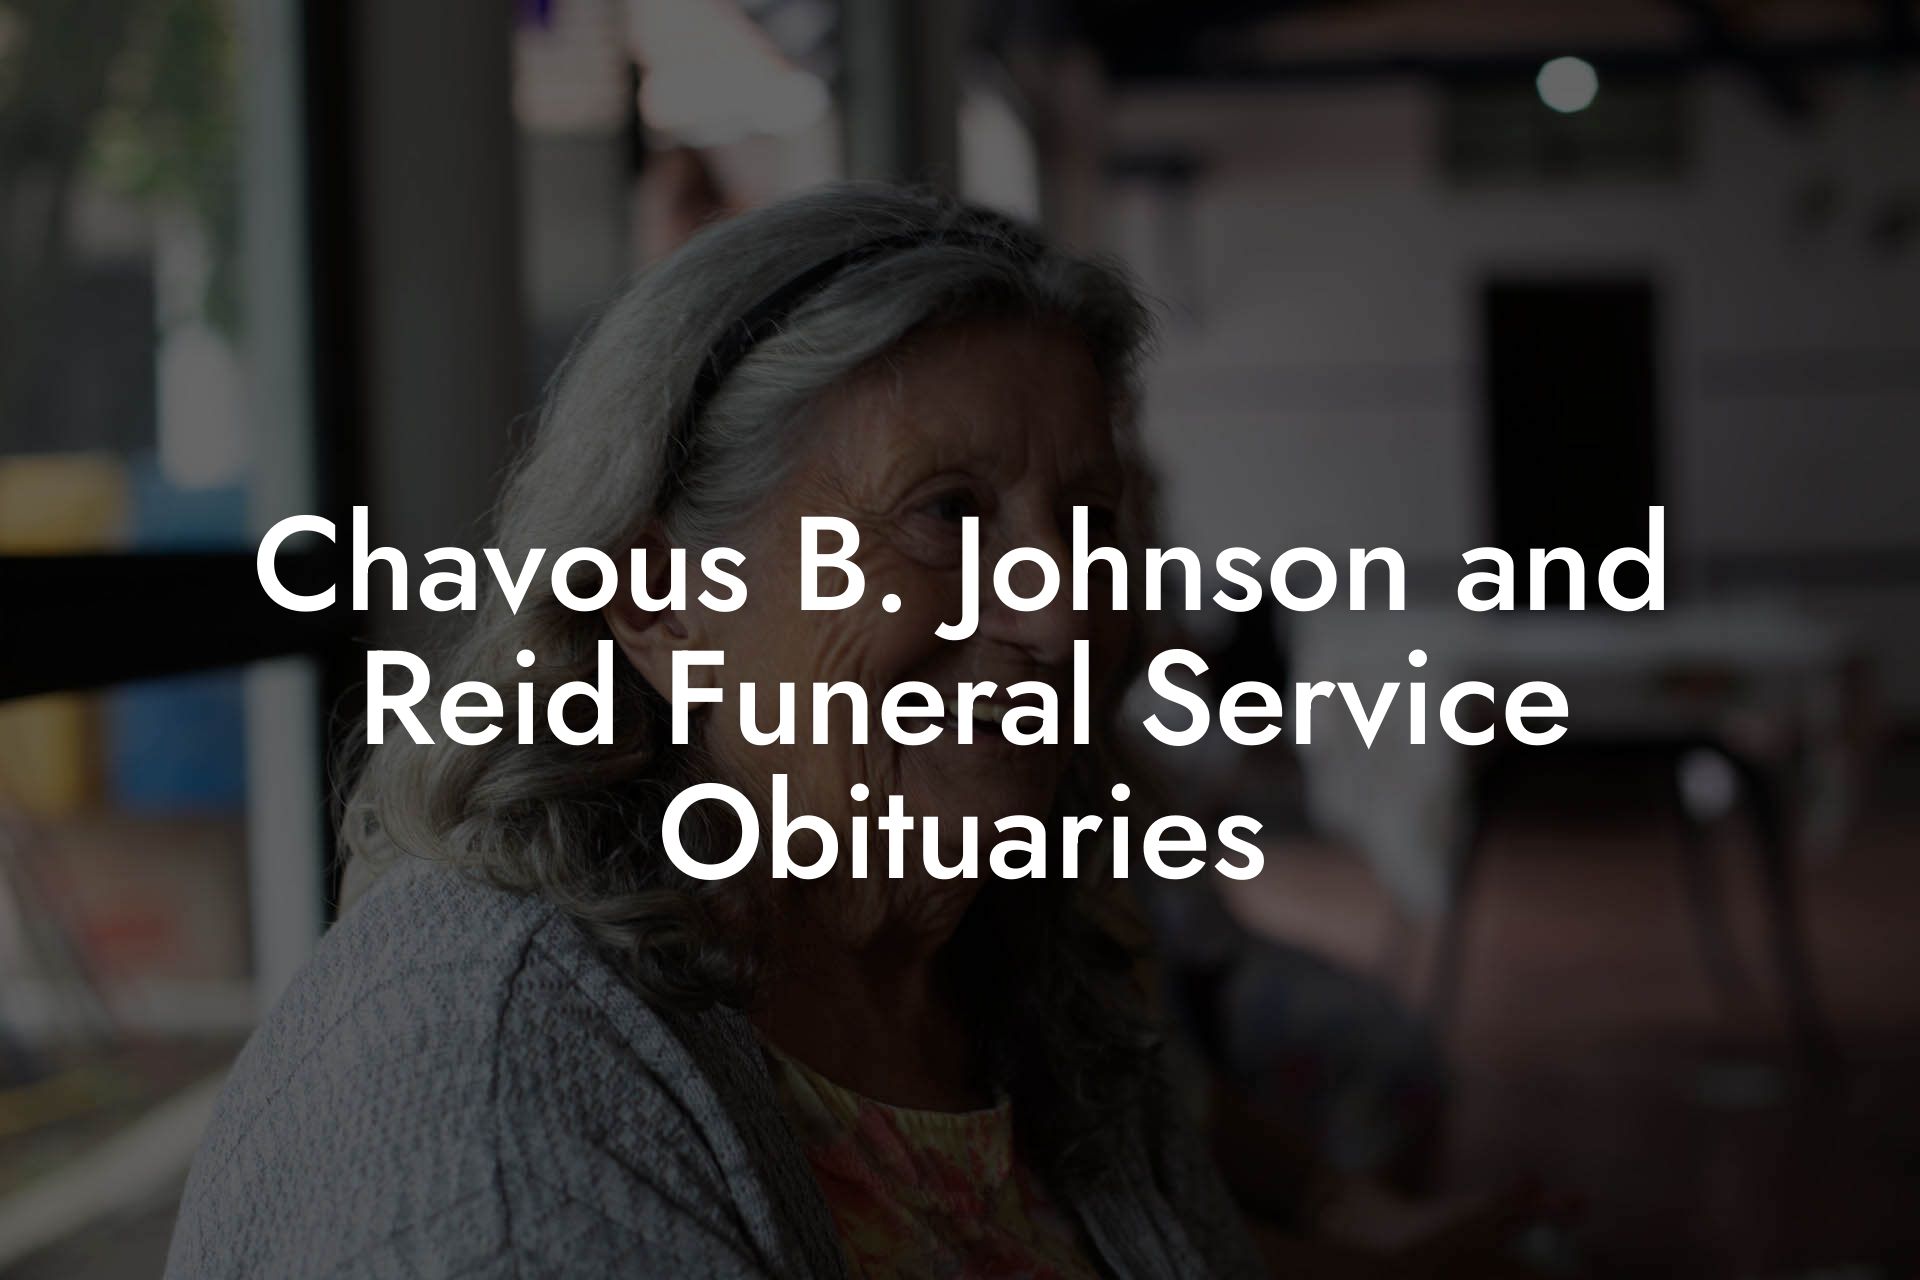 Chavous B. Johnson and Reid Funeral Service Obituaries